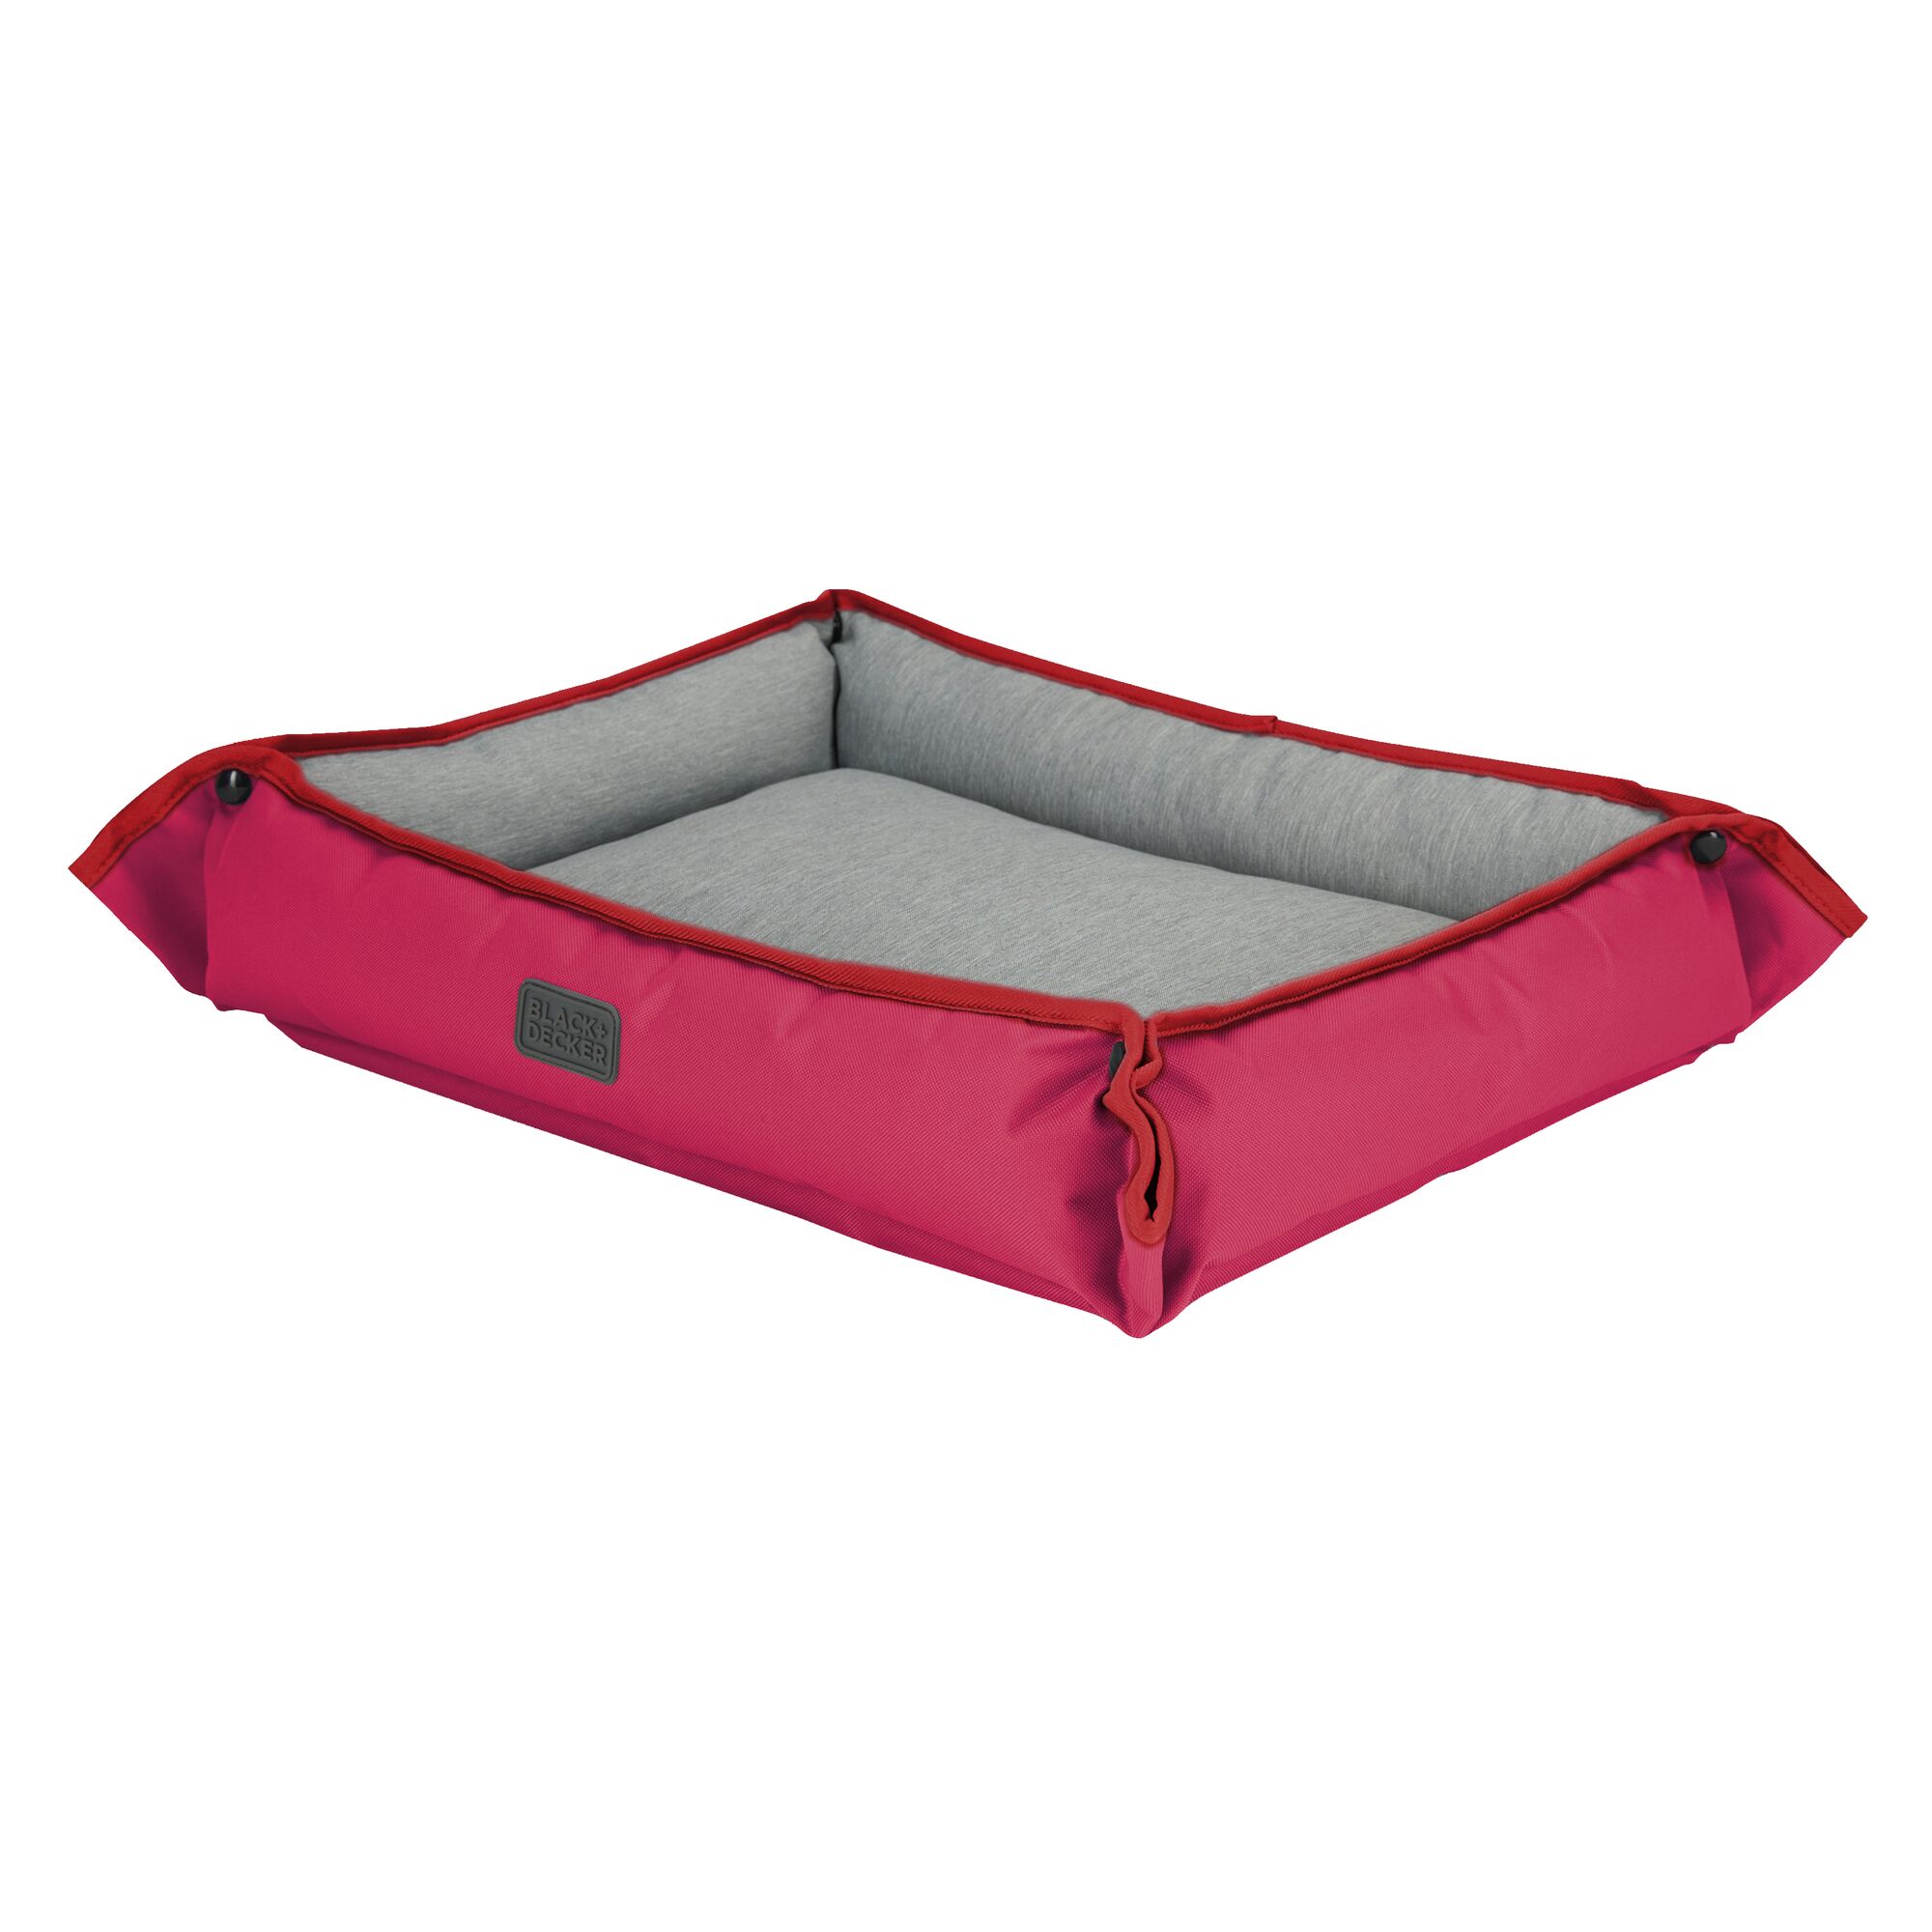 Side view of Red Black and Decker Medium Dog Four Way Snap Pet Bed